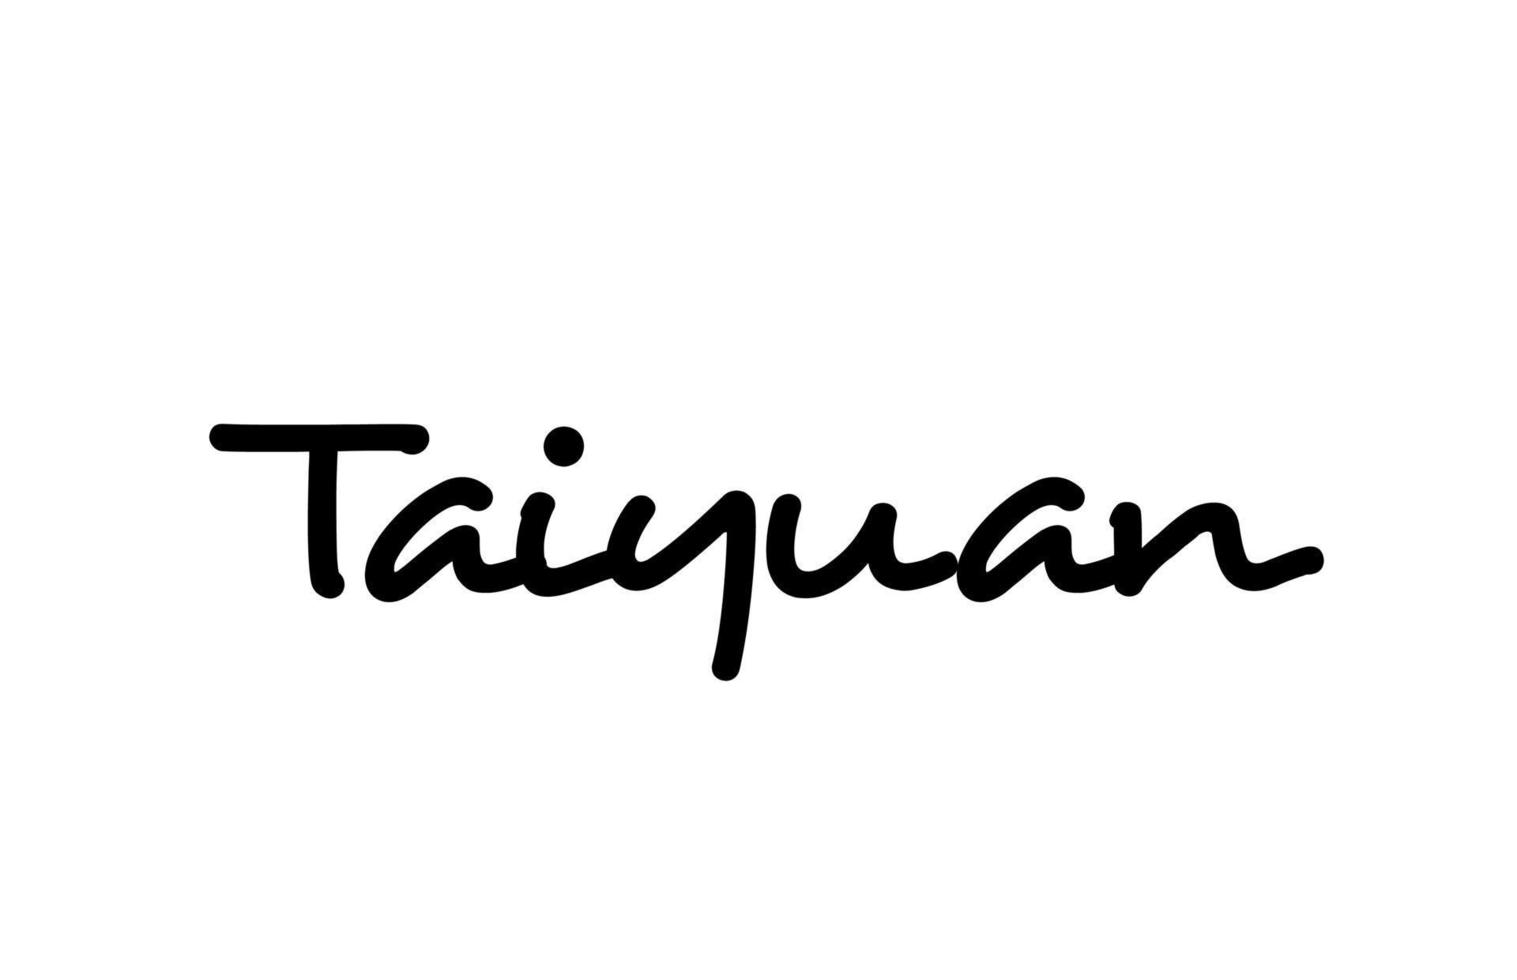 Taiyuan city handwritten word text hand lettering. Calligraphy text. Typography in black color vector